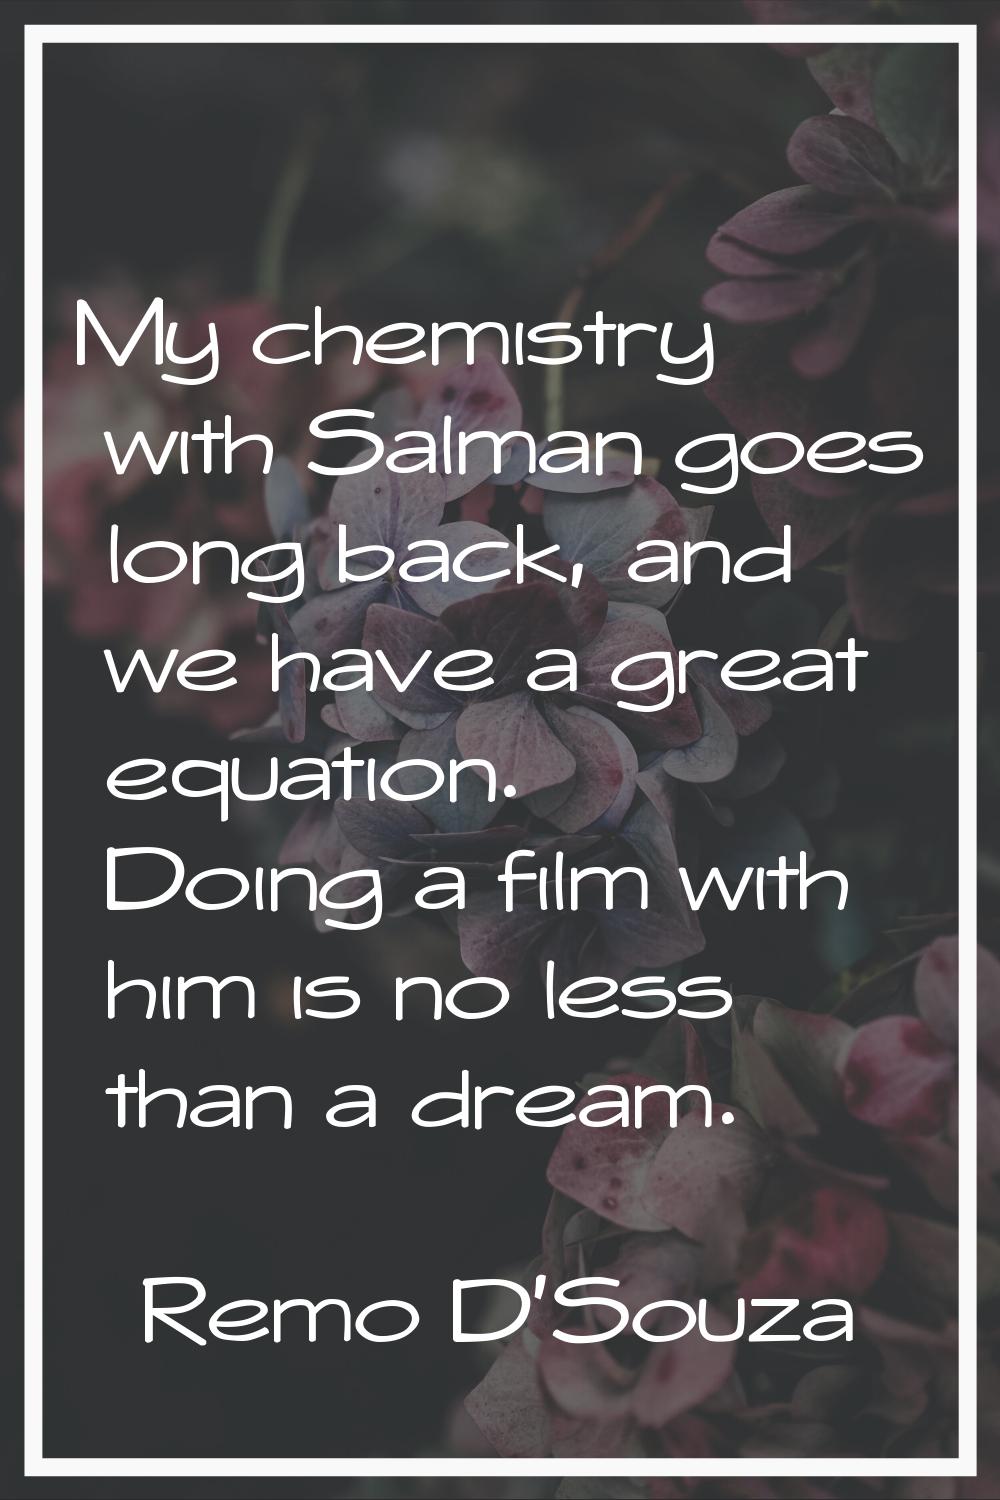 My chemistry with Salman goes long back, and we have a great equation. Doing a film with him is no 